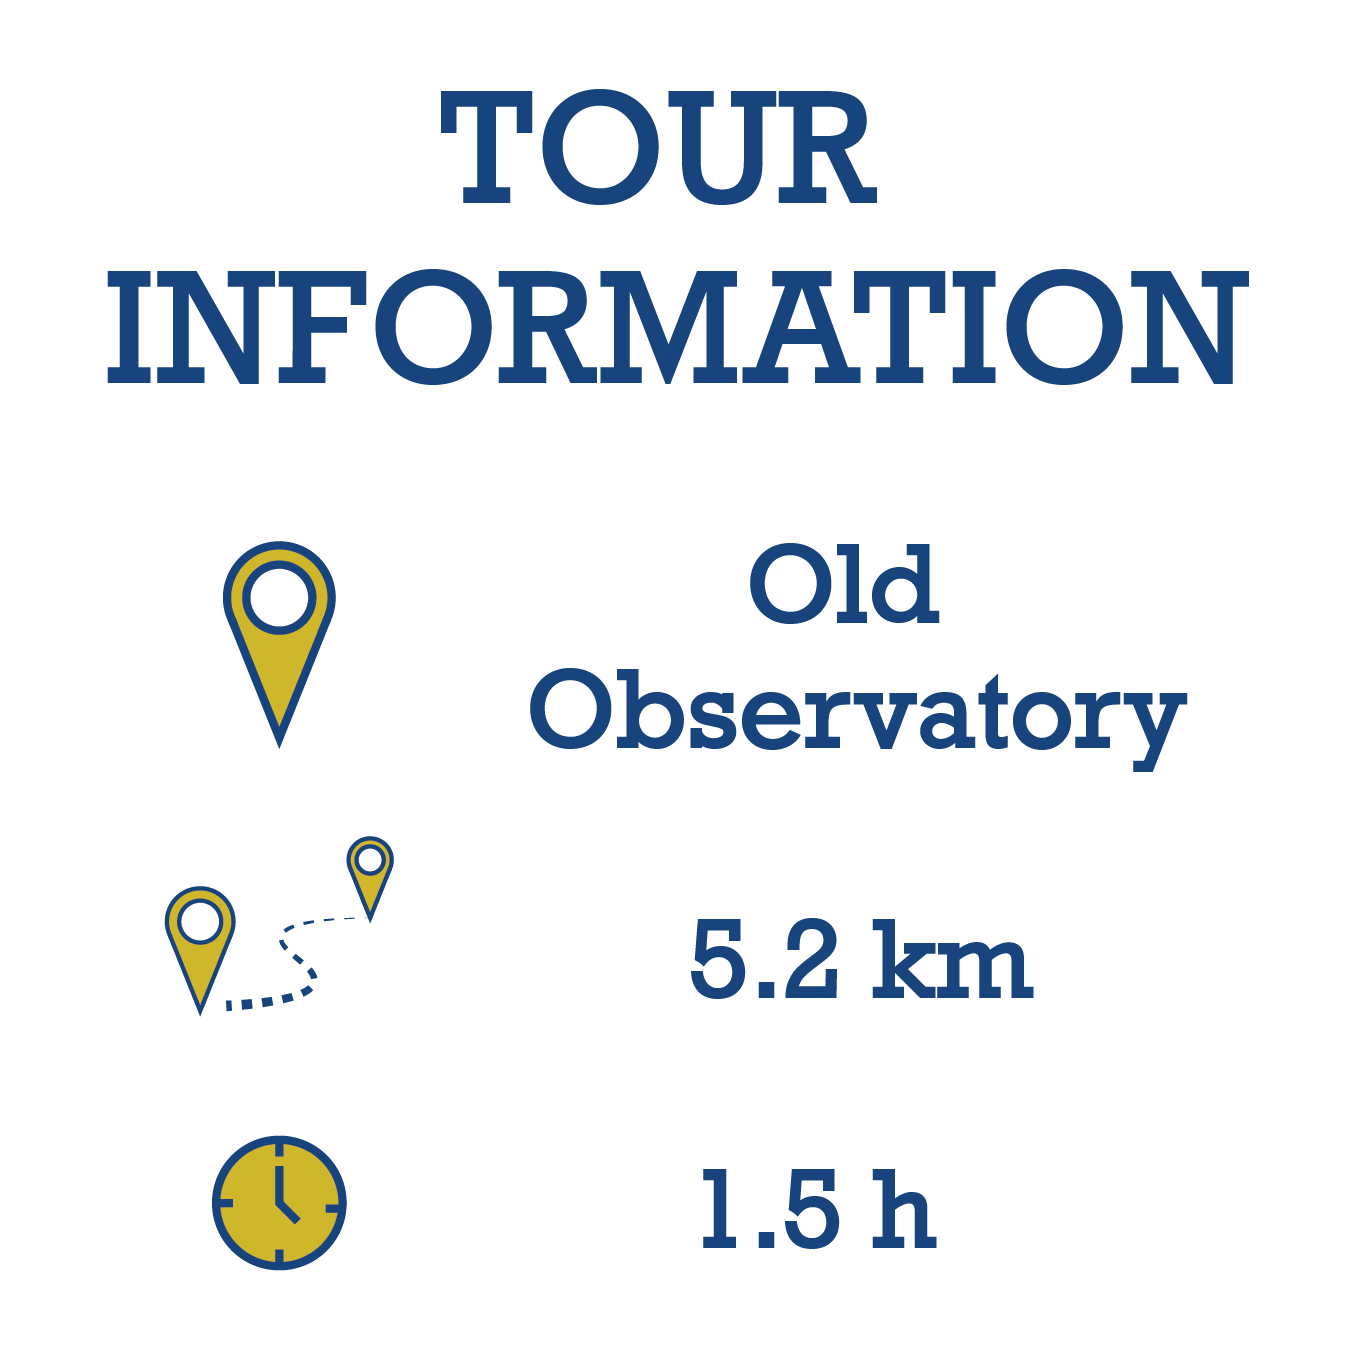 Tour information: 5.2km walk with 1.5 hour duration starting at the Old Observatory.